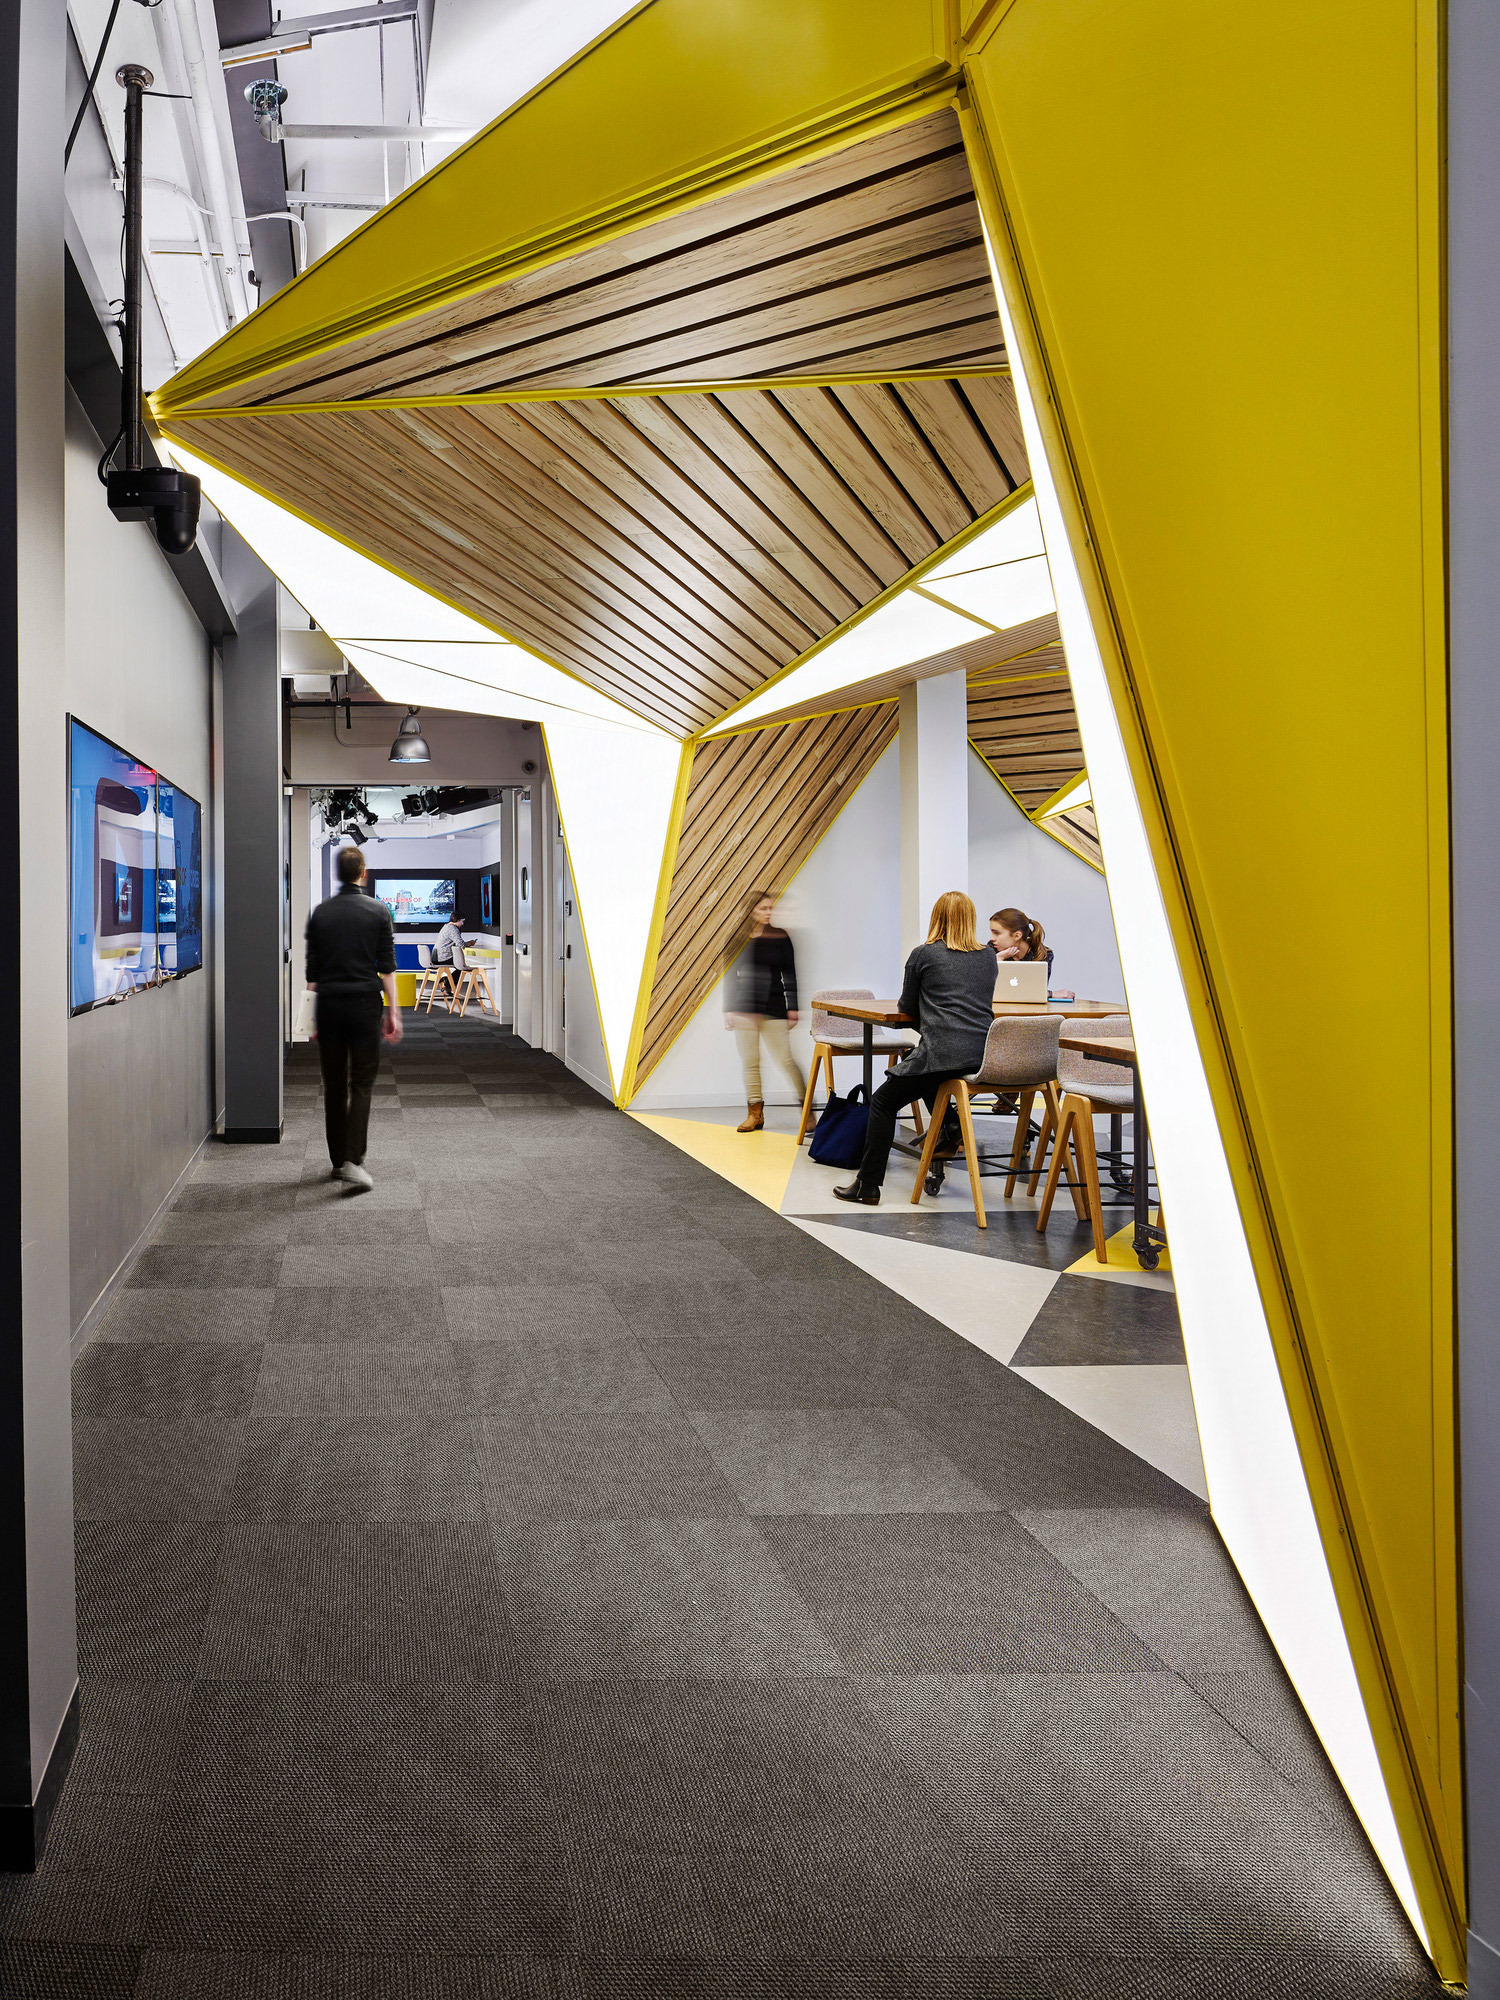 A vibrant modern office space with dynamic geometric forms, featuring a bold yellow triangular entrance that frames the view into a collaborative workspace with wooden elements and informal seating arrangements. The flooring transitions from patterned carpet to sleek wooden finish, enhancing depth and texture.